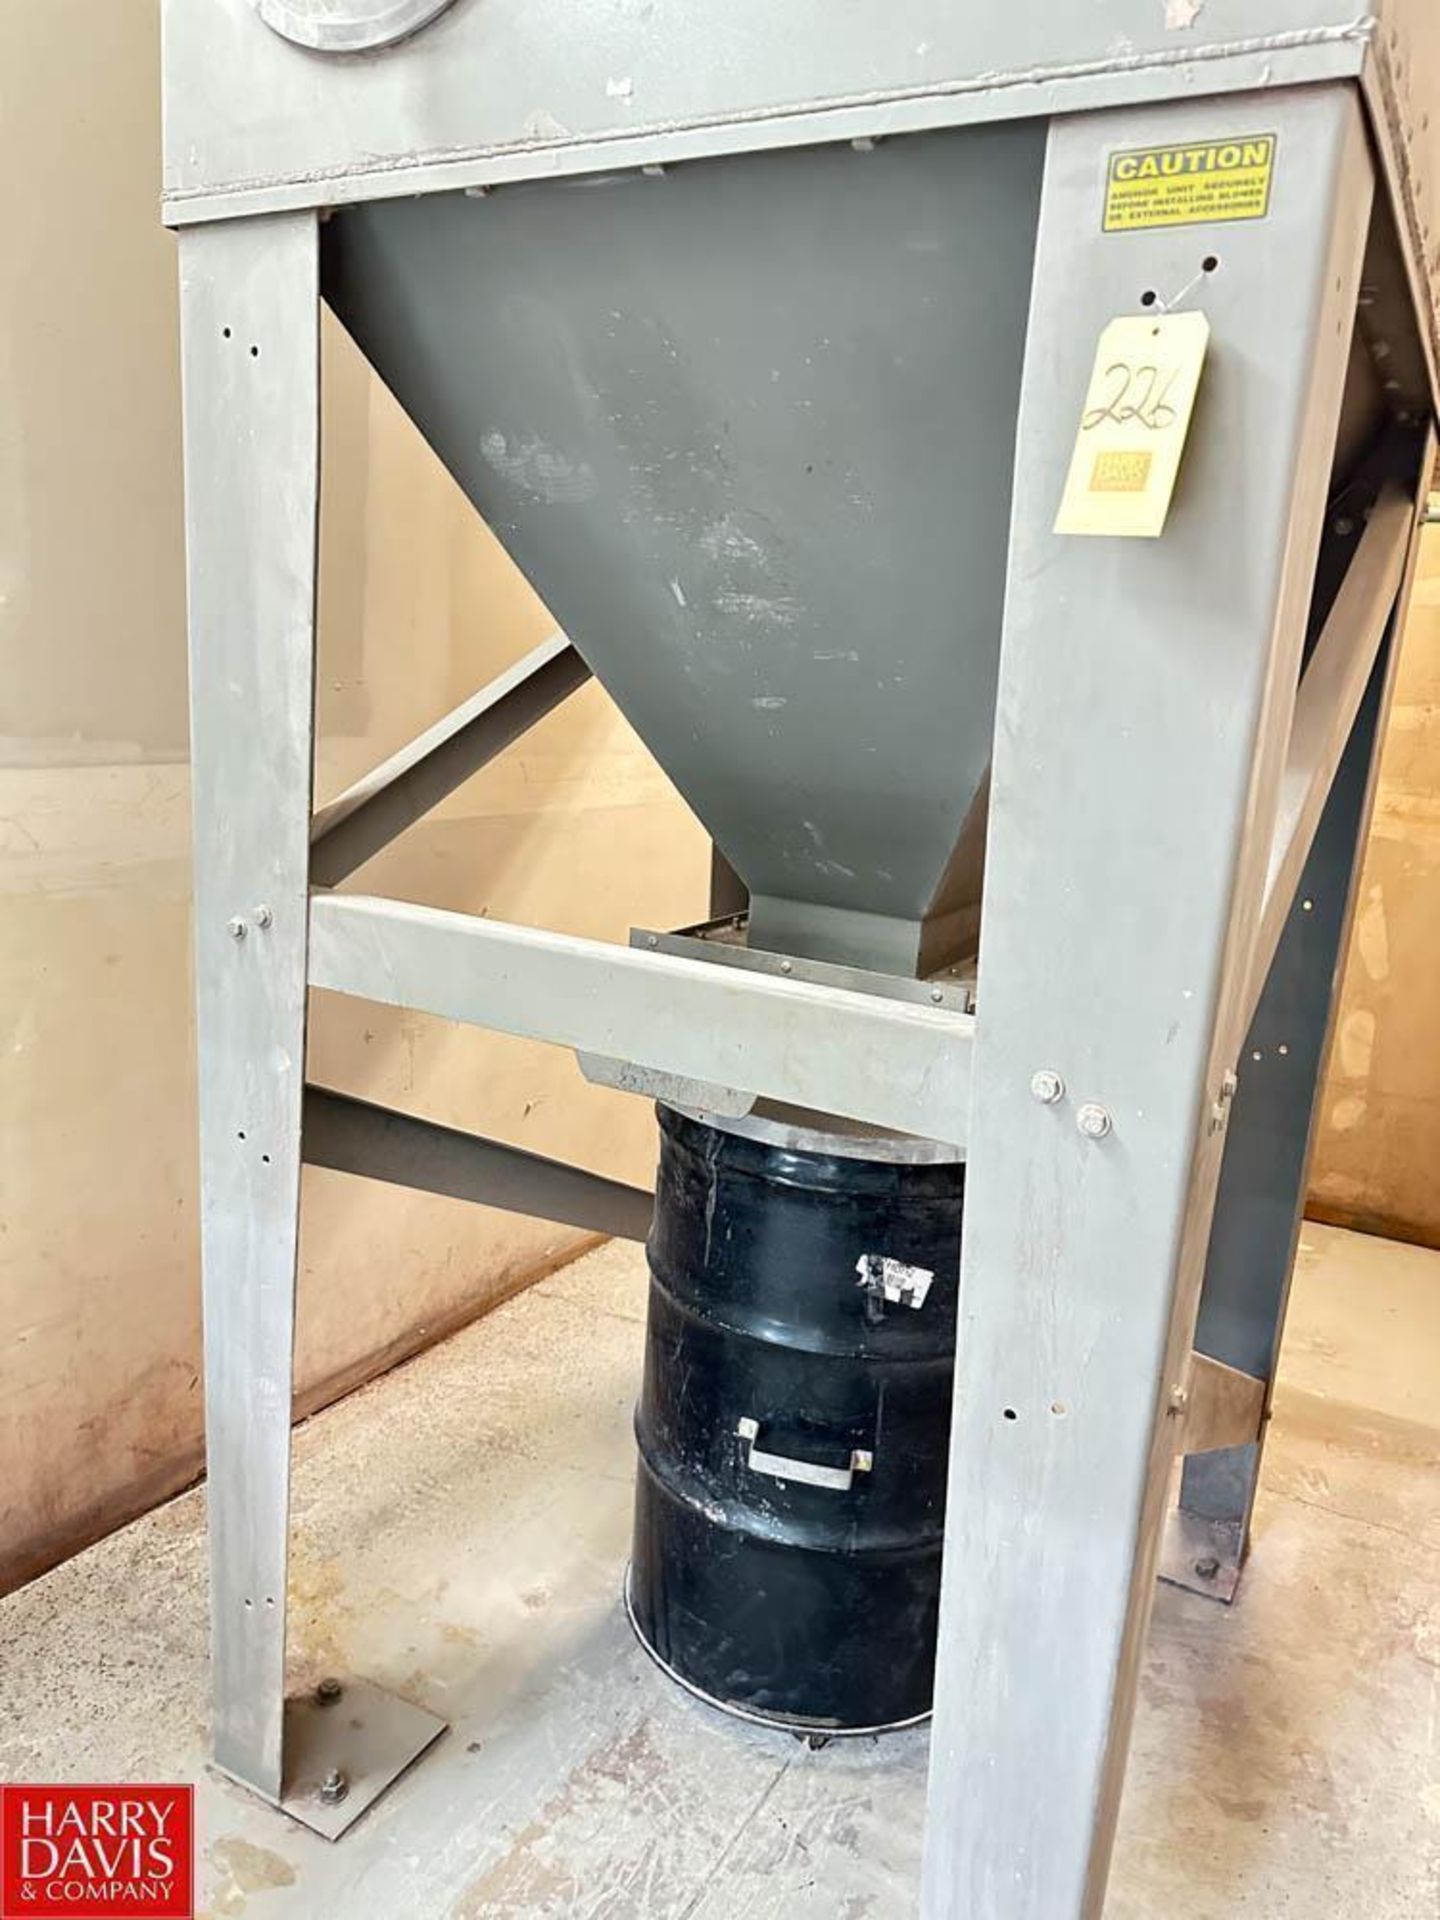 United Air Specialists Dust-Hog Dust Collector, Model: SBD8-2 - Rigging Fee: $850 - Image 4 of 6